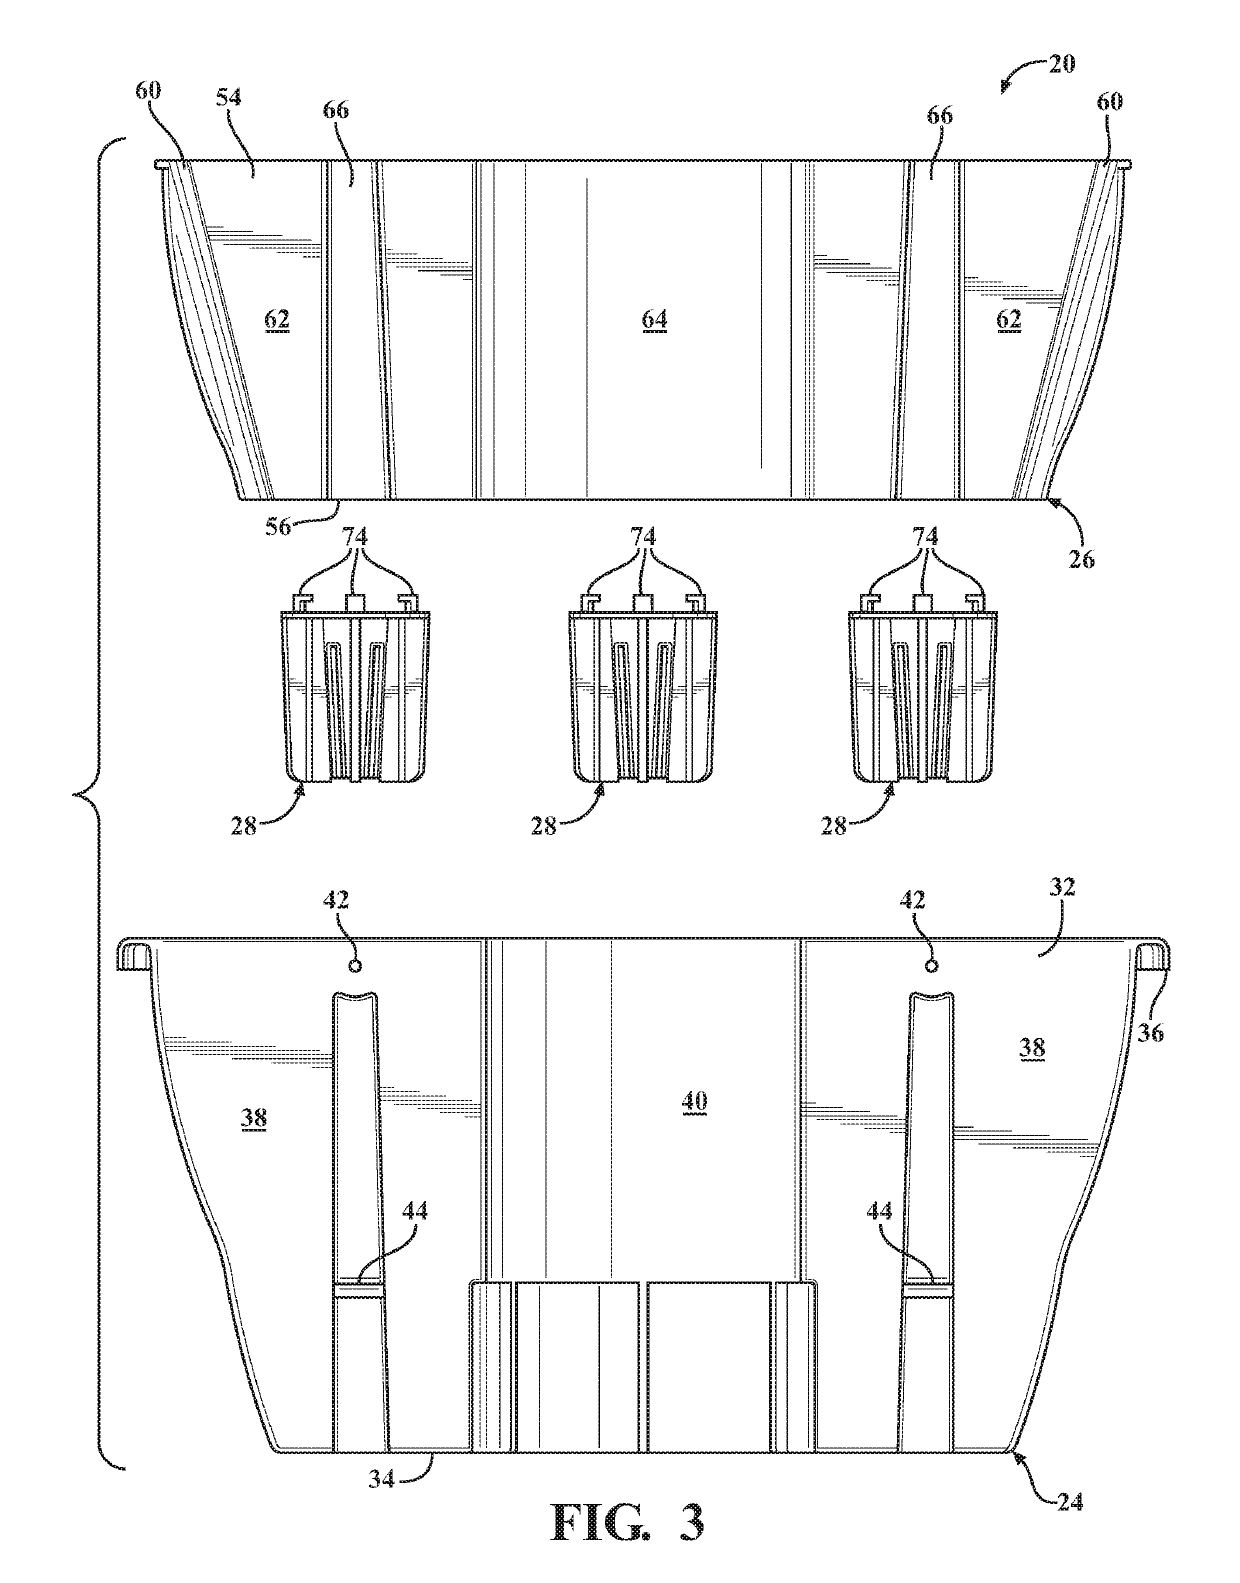 Pole and wall adaptable plant container assembly and bracket